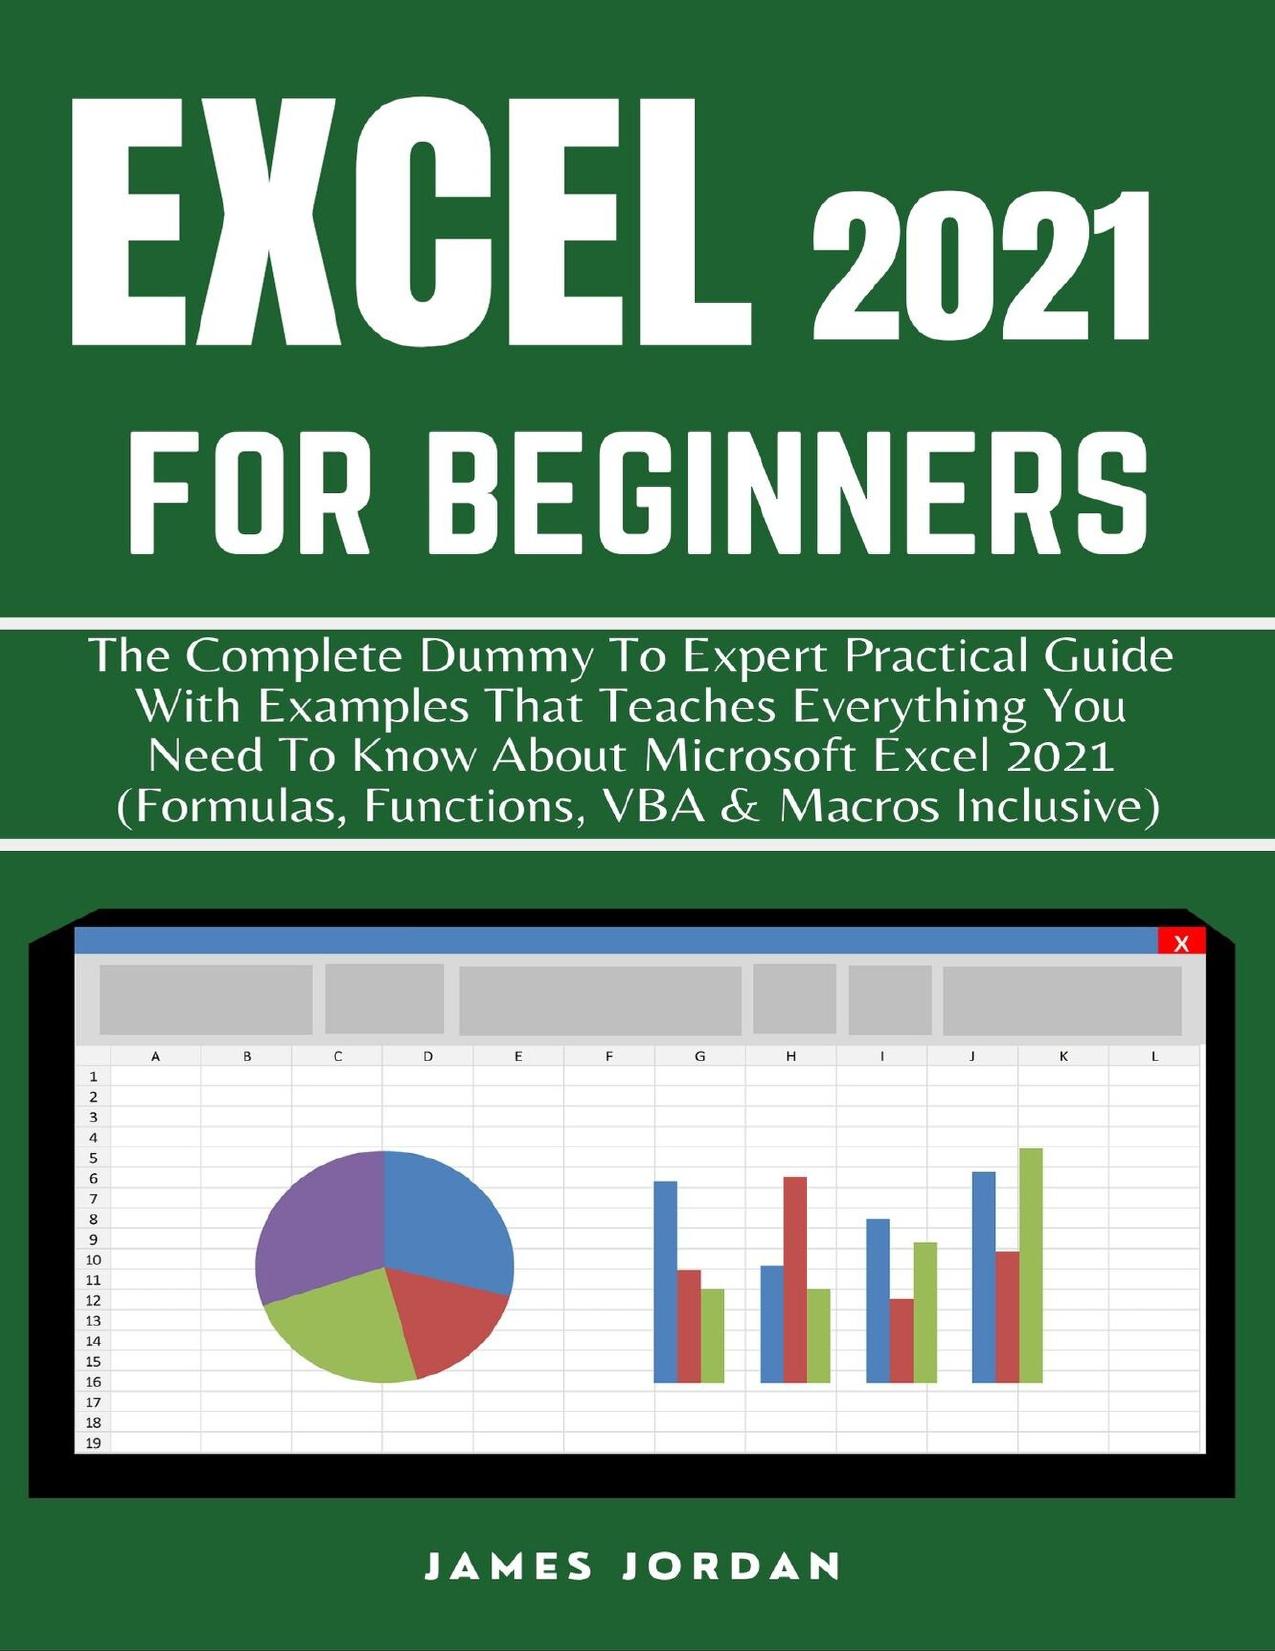 EXCEL 2021 FOR BEGINNERS: THE COMPLETE DUMMY TO EXPERT PRACTICAL GUIDE WITH EXAMPLES THAT TEACHES EVERYTHING YOU NEED TO KNOW ABOUT MICROSOFT EXCEL 2021 (FORMULAS, FUNCTIONS, VBA & MACROS INCLUSIVE) by JORDAN JAMES